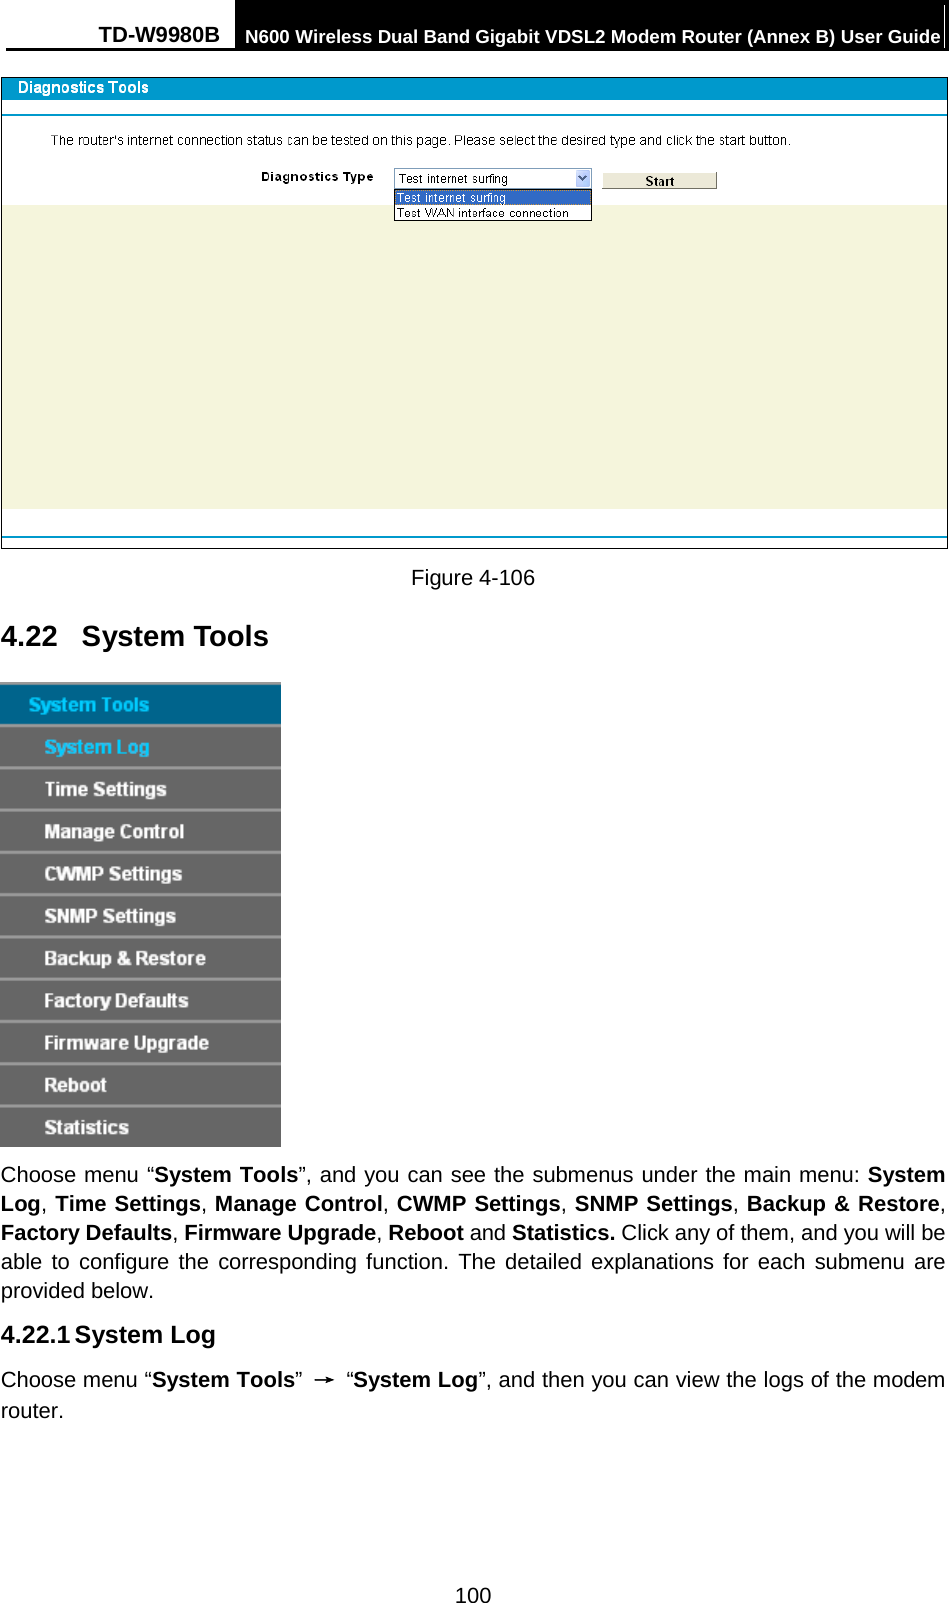 TD-W9980B N600 Wireless Dual Band Gigabit VDSL2 Modem Router (Annex B) User Guide   Figure 4-106   4.22 System Tools  Choose menu “System Tools”, and you can see the submenus under the main menu: System Log, Time Settings, Manage Control, CWMP Settings, SNMP Settings, Backup &amp; Restore, Factory Defaults, Firmware Upgrade, Reboot and Statistics. Click any of them, and you will be able to configure the corresponding function. The detailed explanations for each submenu are provided below. 4.22.1 System Log Choose menu “System Tools” → “System Log”, and then you can view the logs of the modem router. 100 